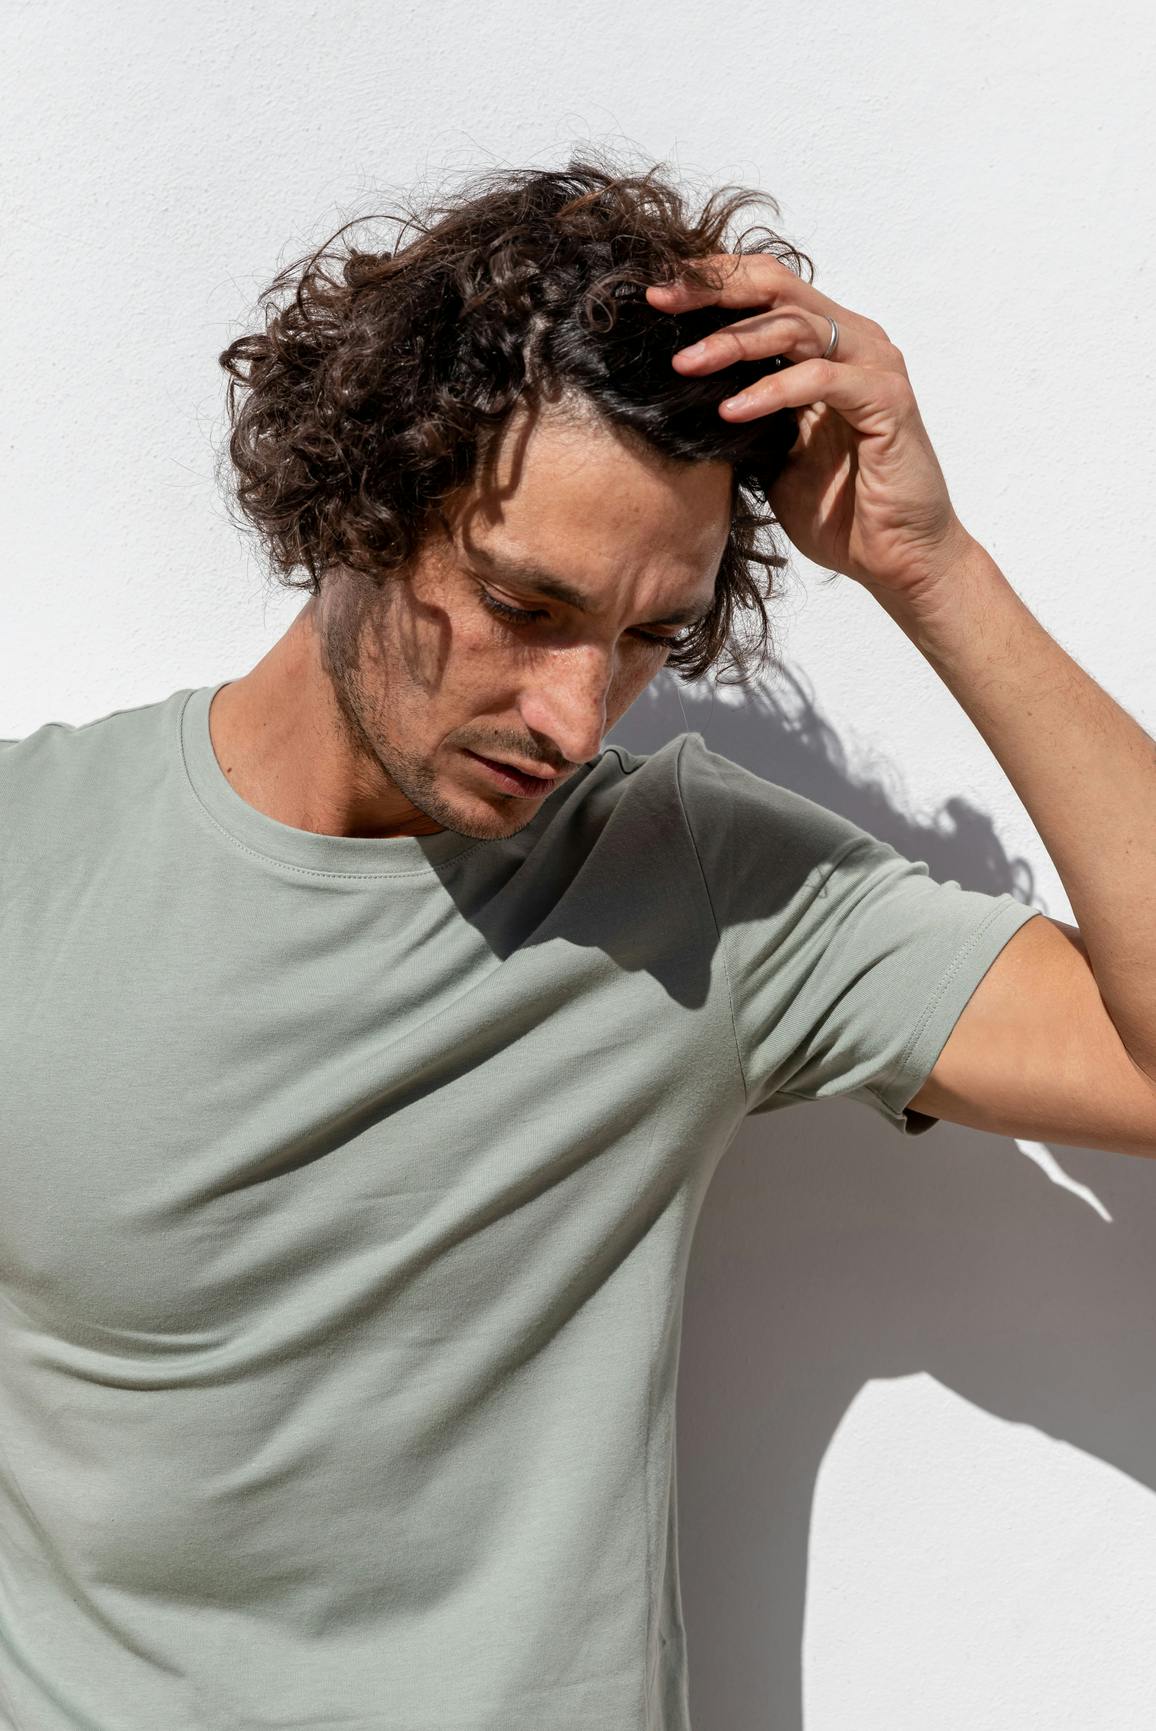 A man standing against a white wall in the sun running his hand through his curly brown hair while looking down